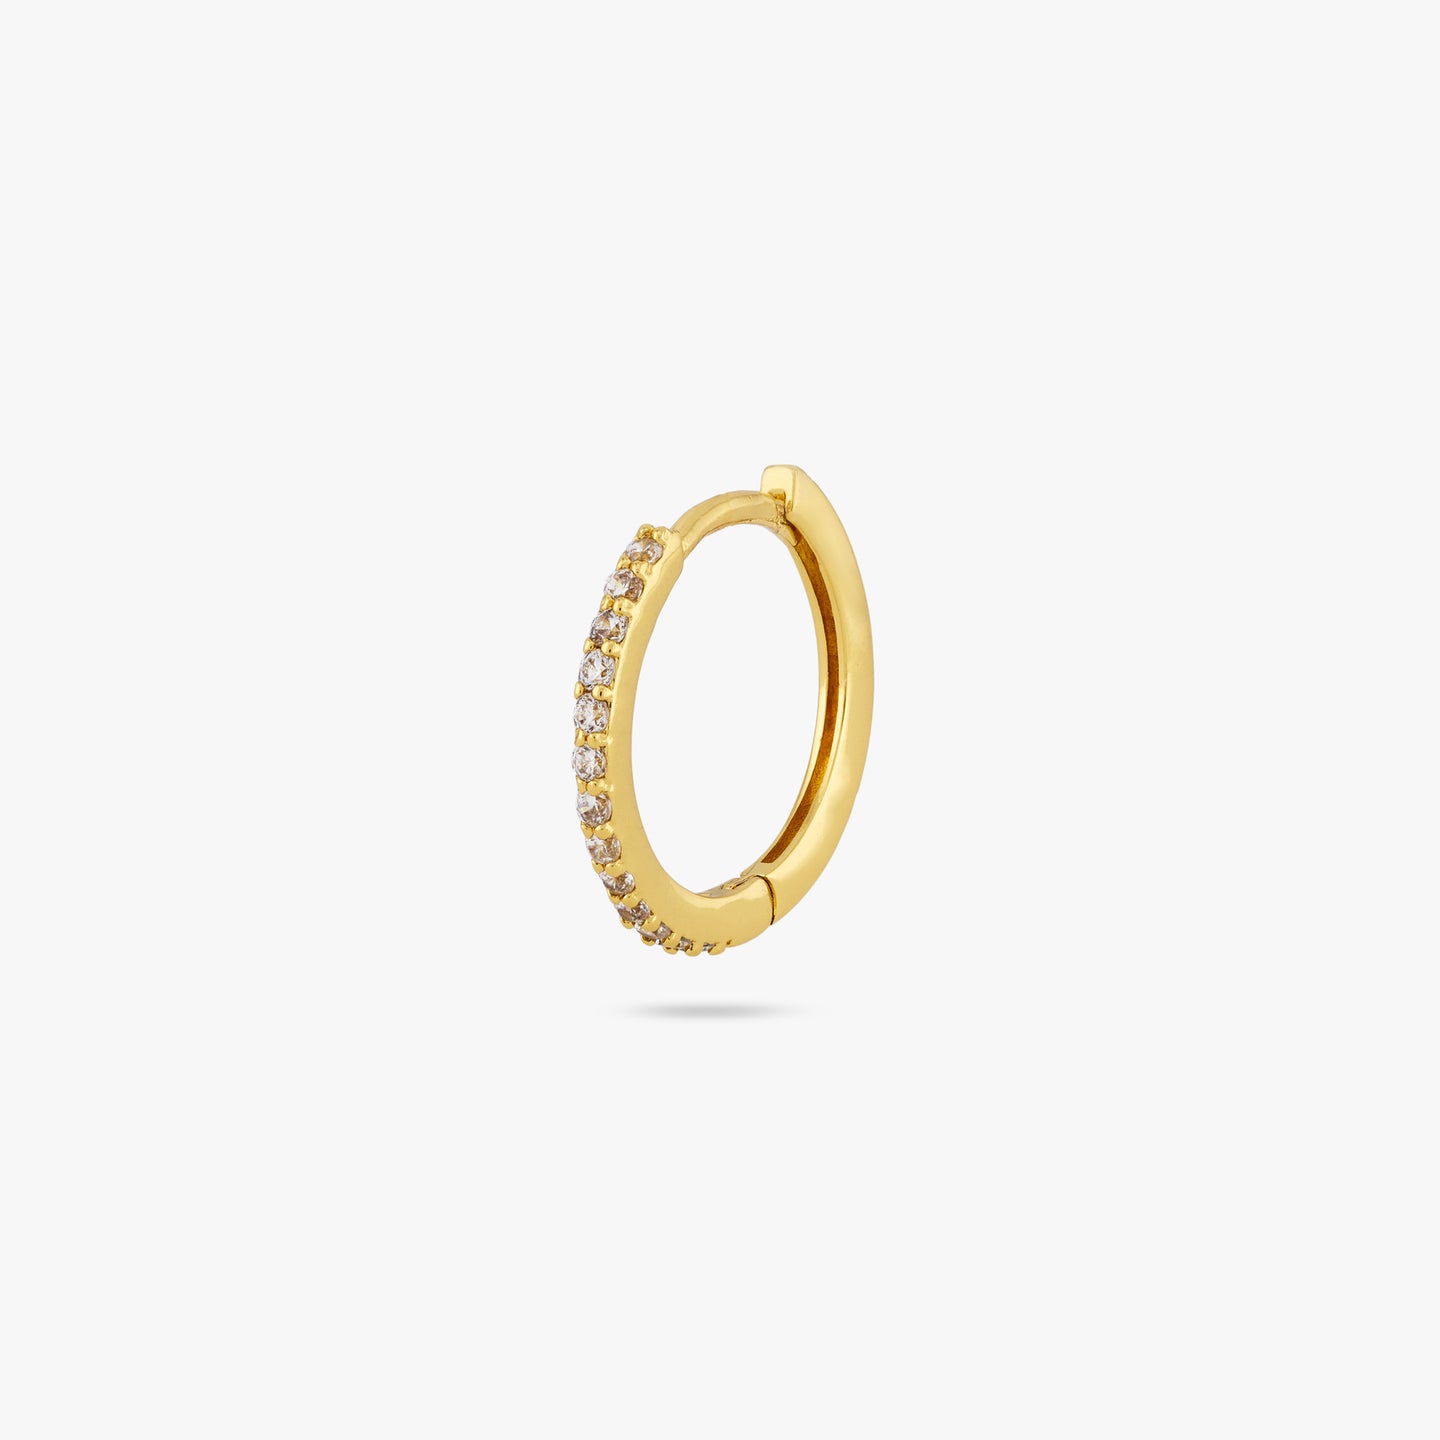 This is a small gold hoop with clear cz gems along the front color:null|gold/clear